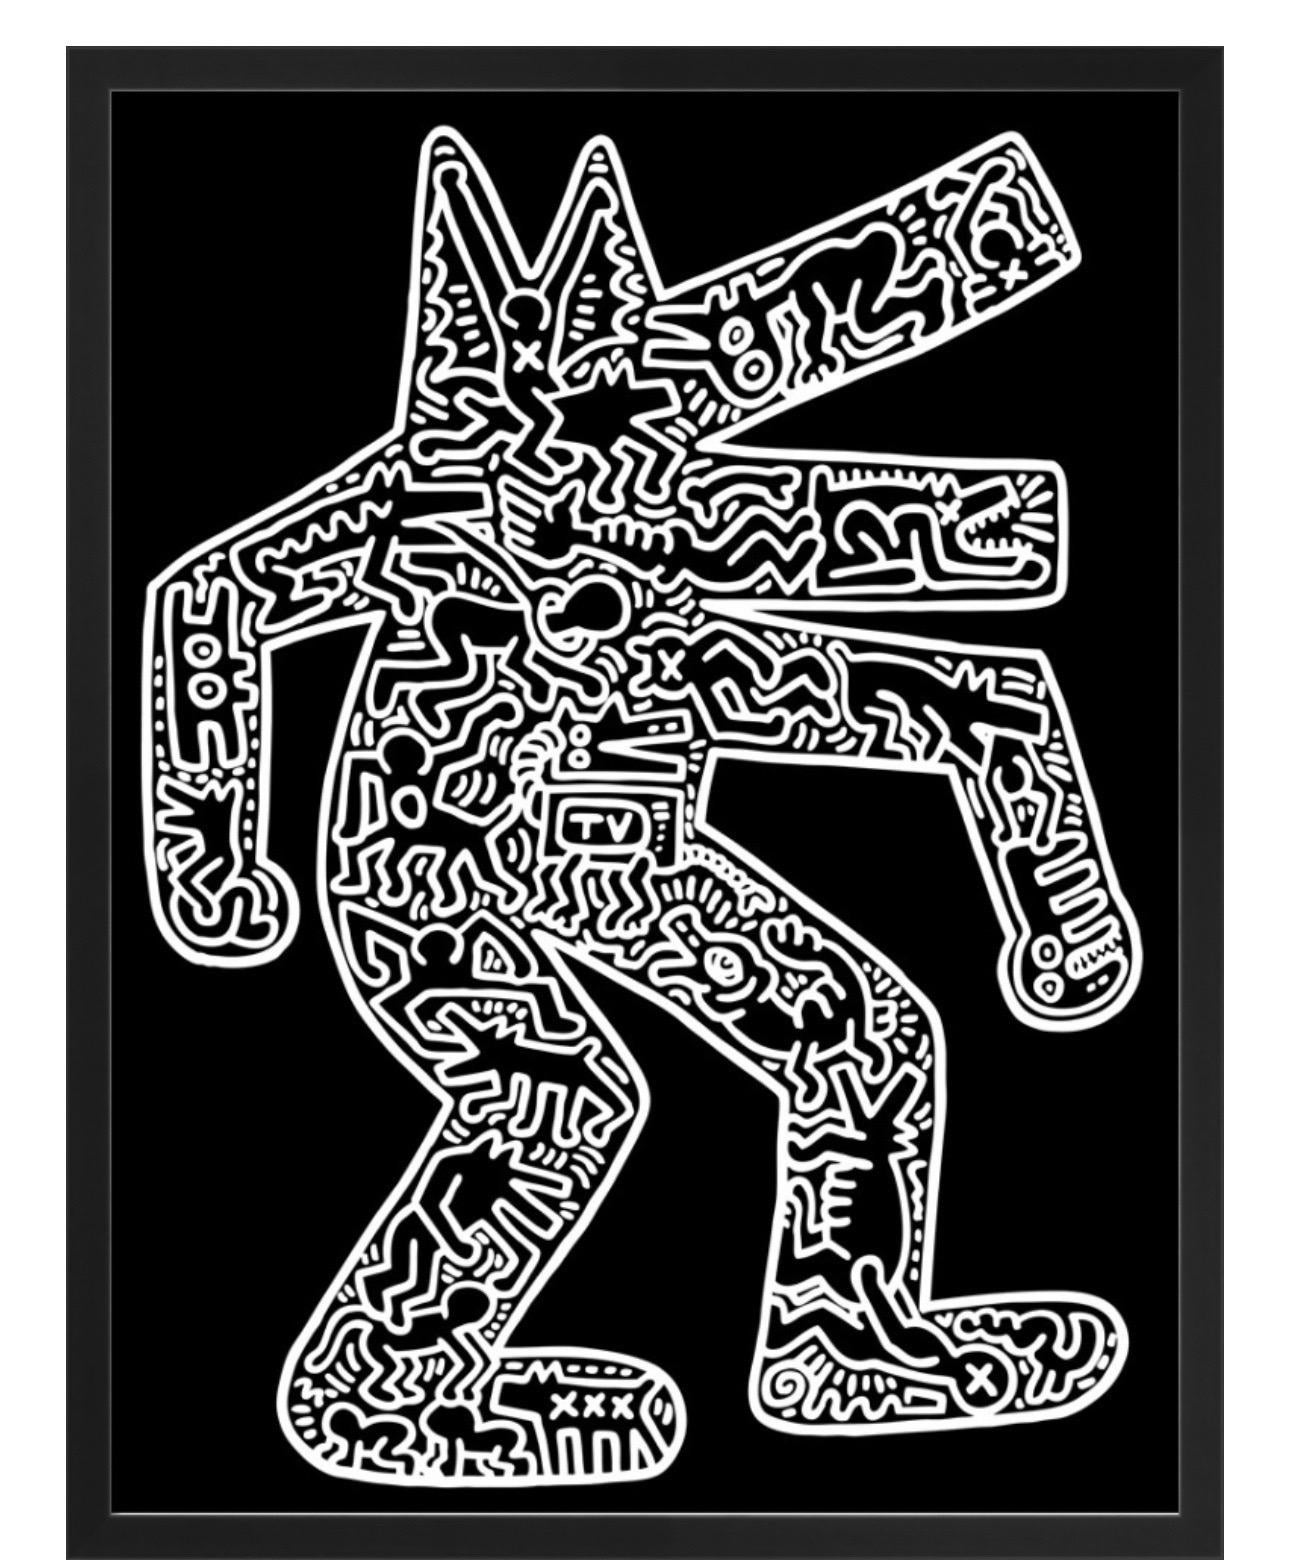 Keith Haring, Dog, 1985 (Framed)

48 x 63cm

Giclée print on matt 250gsm conservation digital paper made in Germany from acid and chlorine free wood pulp. Manufactured on a Fourdrinier Machine first perfected by the Fourdrinier brothers in